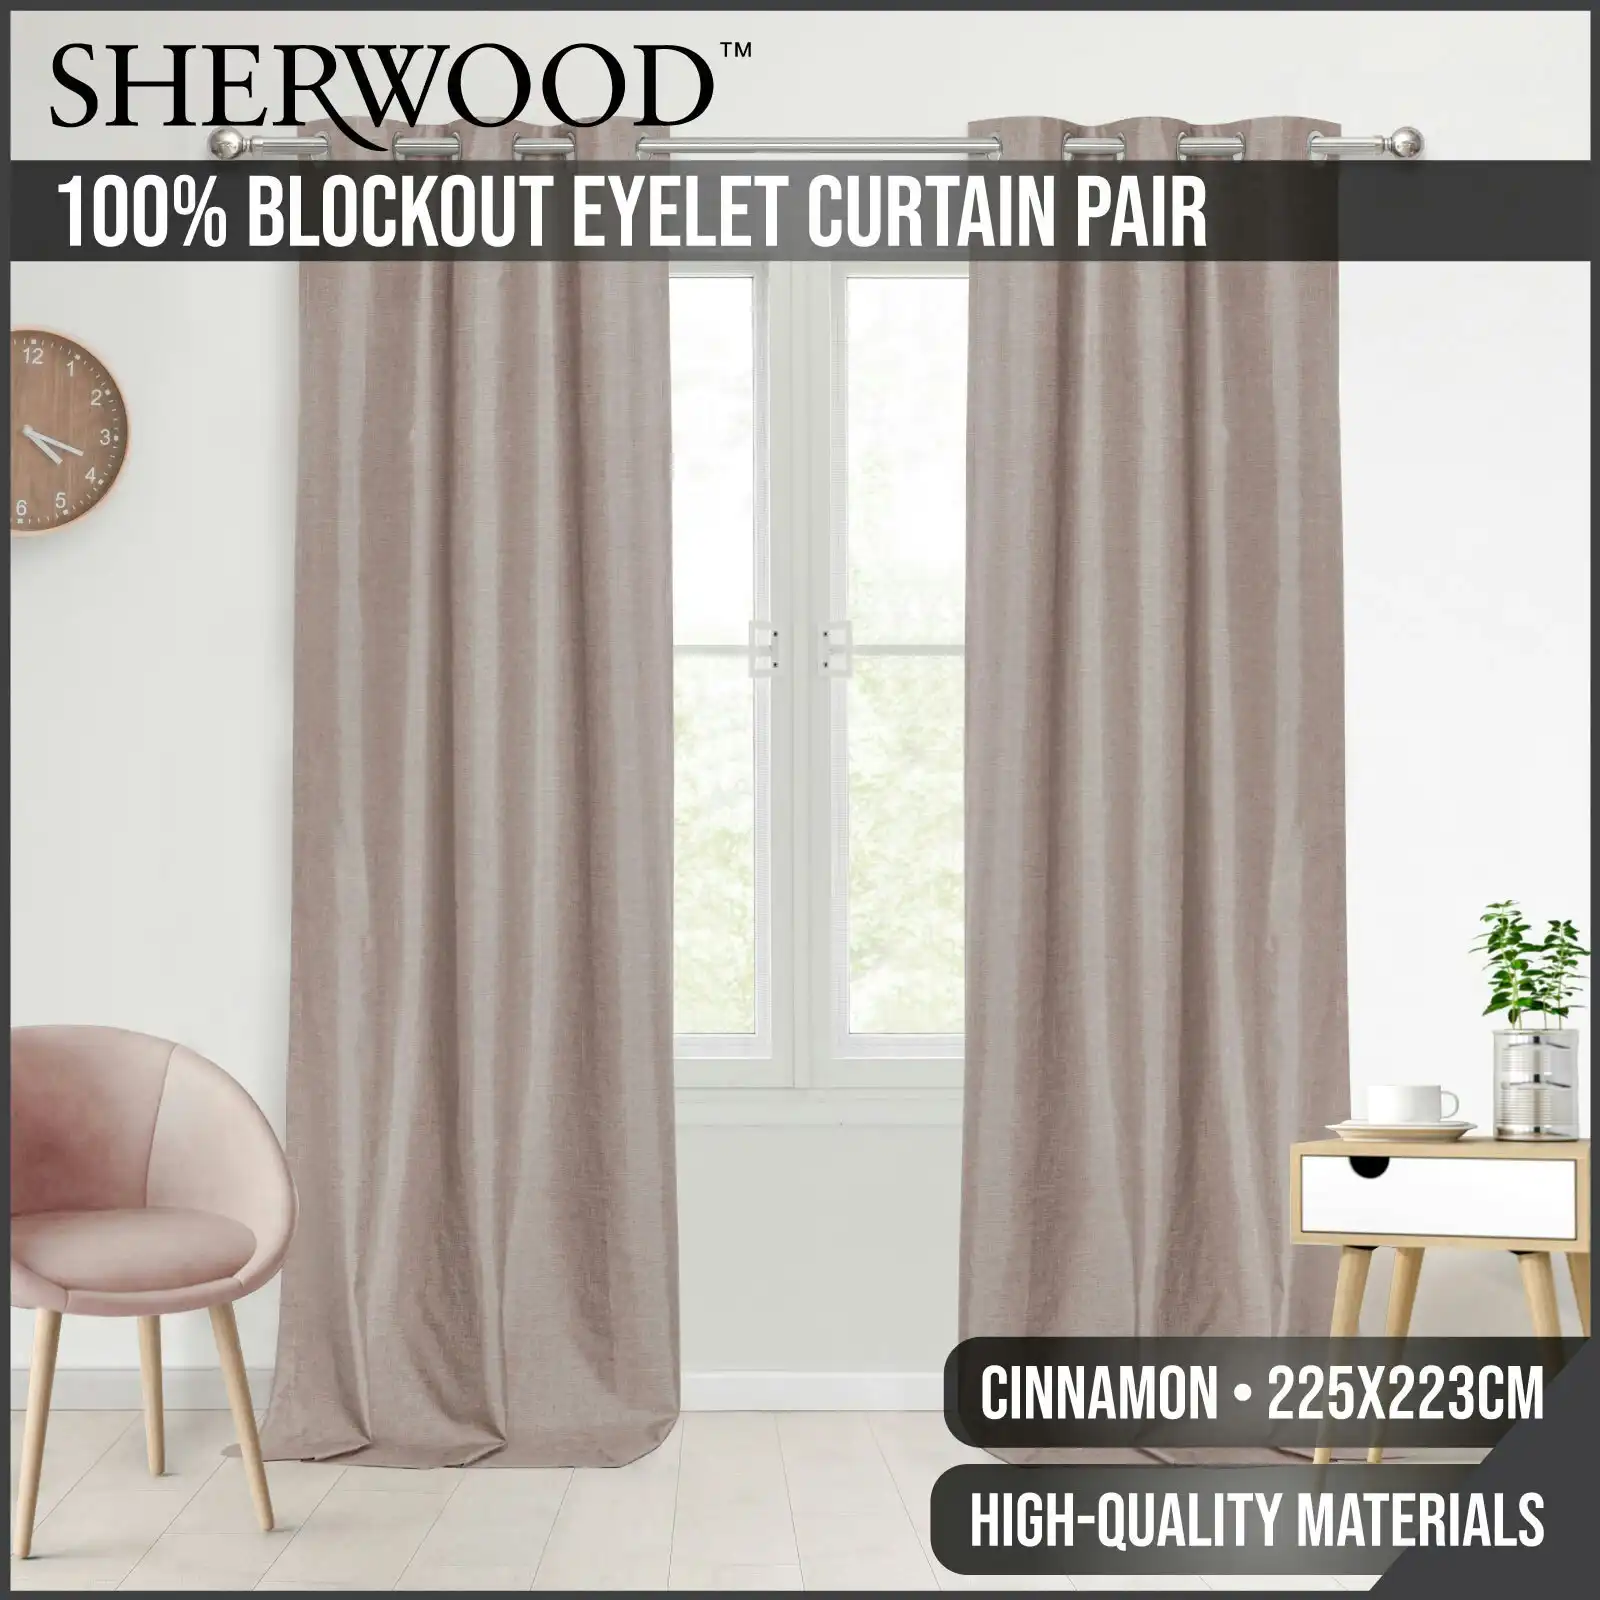 Sherwood Faux linen 100% Blockout eyelet curtains Twin Pack Cinnamon 225X223CM